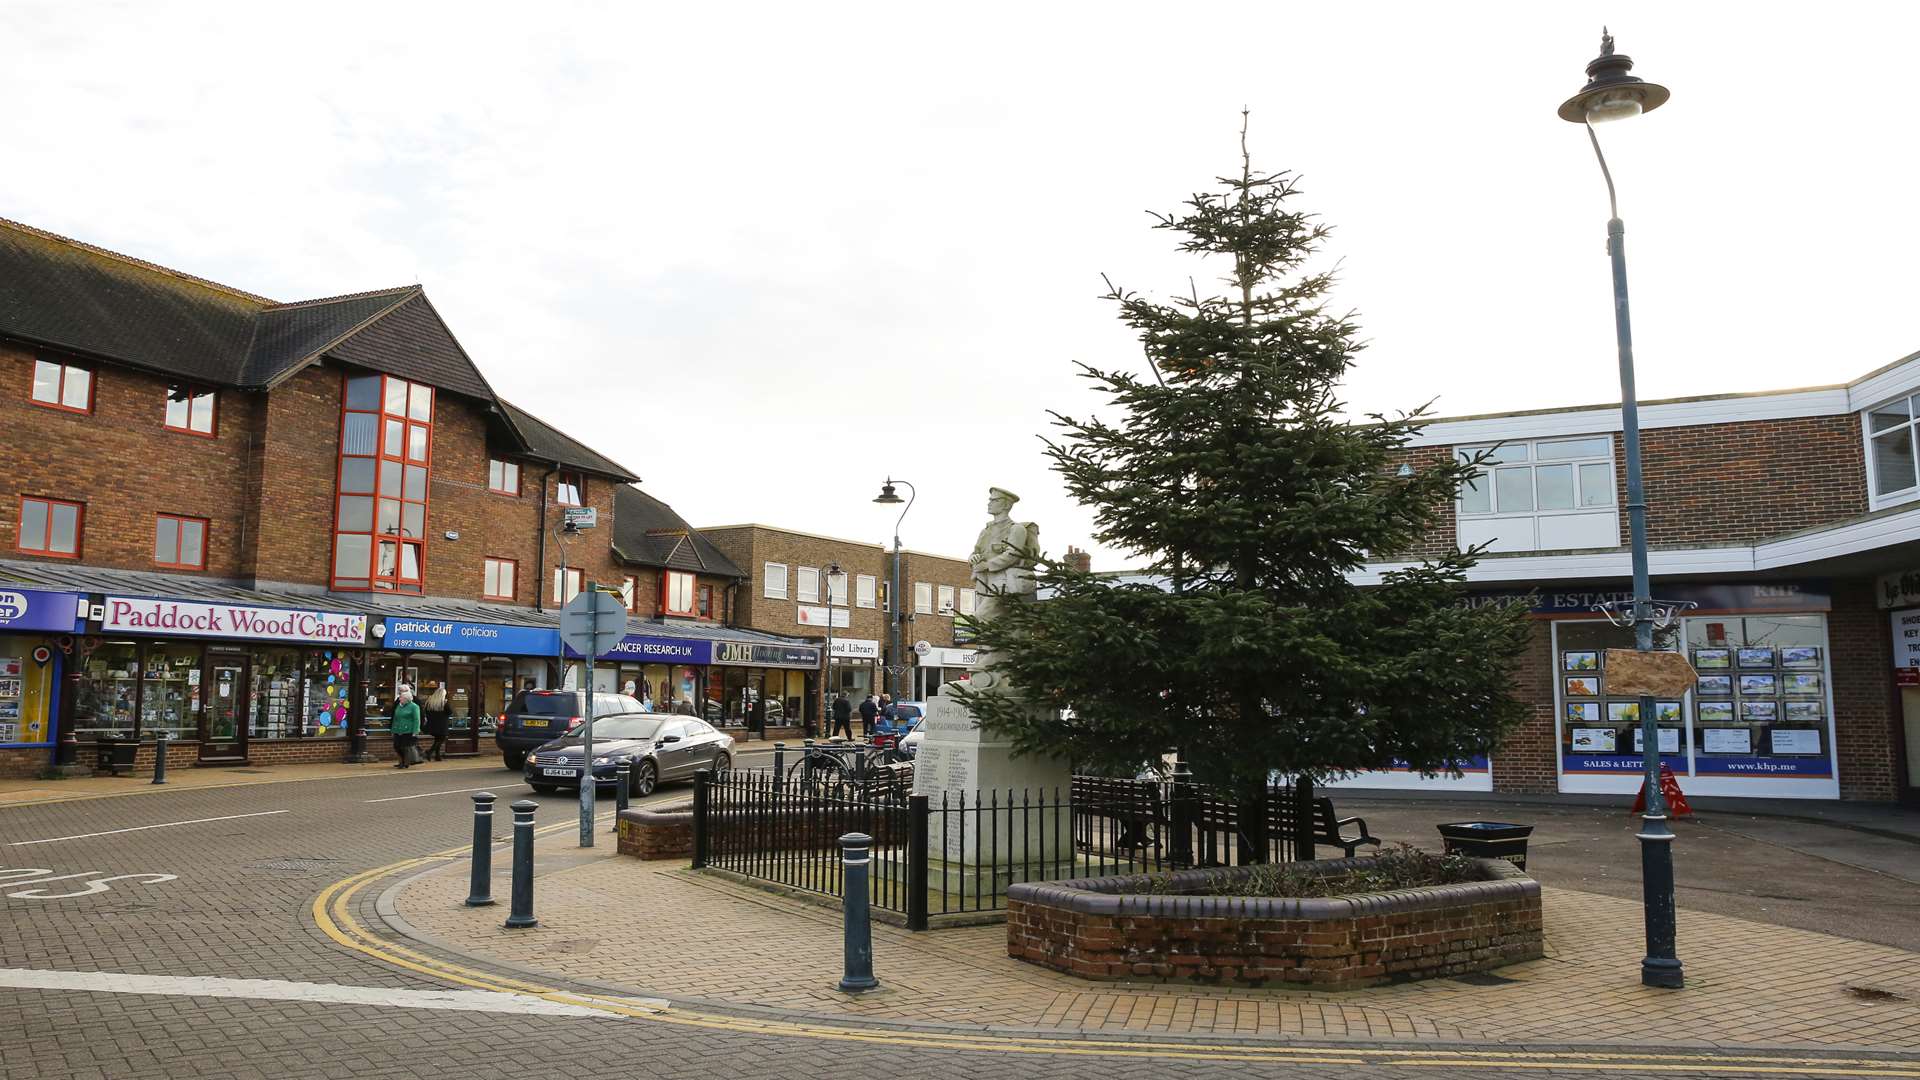 The Christmas tree next to the war memorial in Station Road